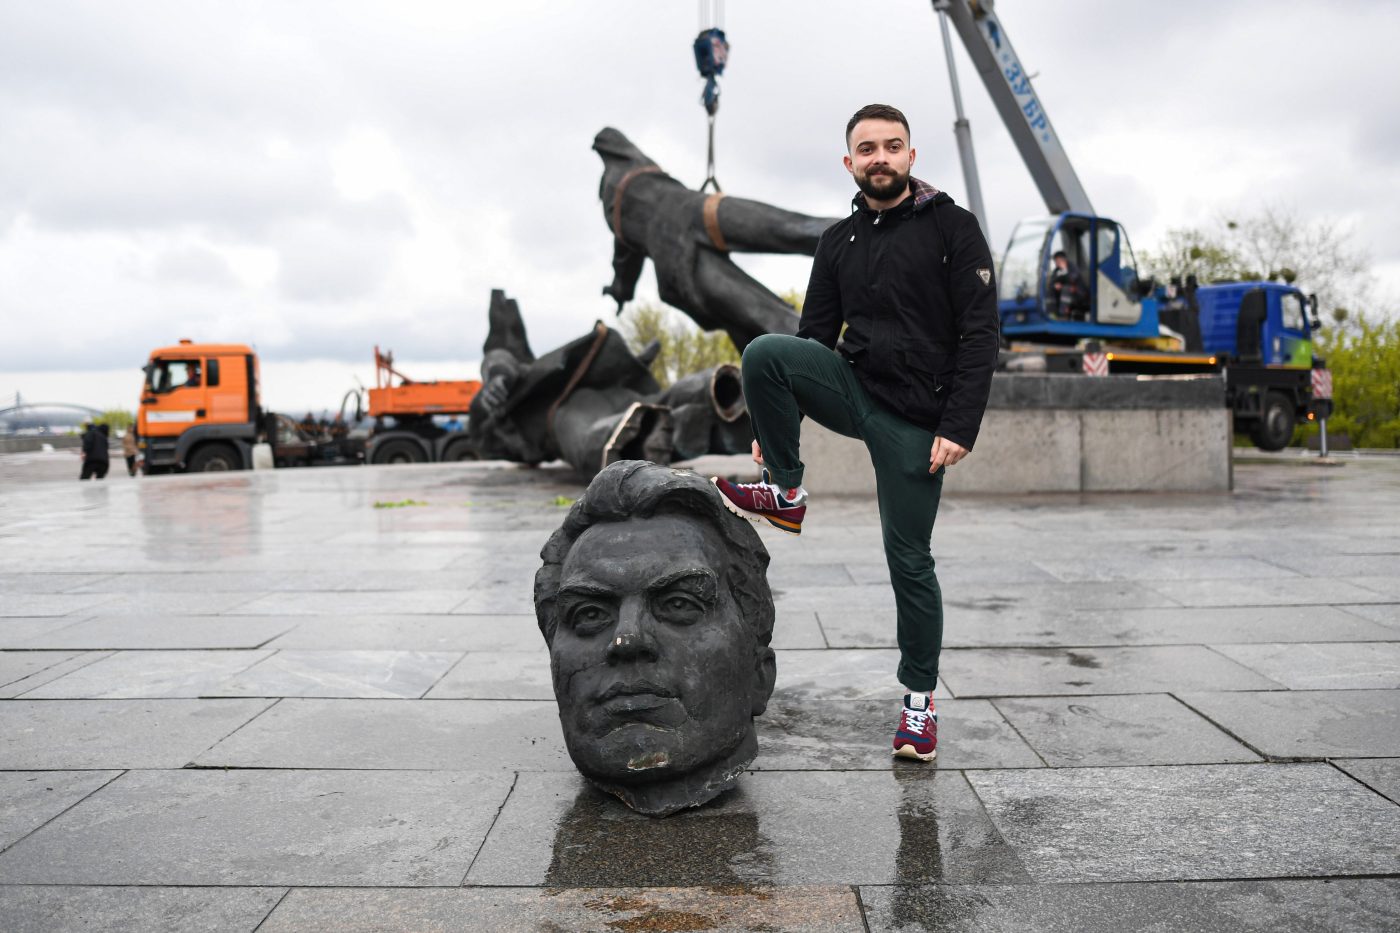 Photo: A man poses for photos while stepping on the dismantled Soviet Union monument. On April 25, 2022, Kyiv mayor Vitali Klitschko announced the removal of the Soviet Union monument in Central Kyiv. This monument erected in 1982 as a symbol of the reunification of Ukraine and Russia during the Soviet government era. The statue of two men holding a medal represents the Soviet Union's Order of Friendship of Peoples, while the rainbow-like arch is called The People's Friendship Arch. Additionally, some streets linked to Russia would be renamed. Credit: Salvatore Cavalli / SOPA Images/Sipa USA